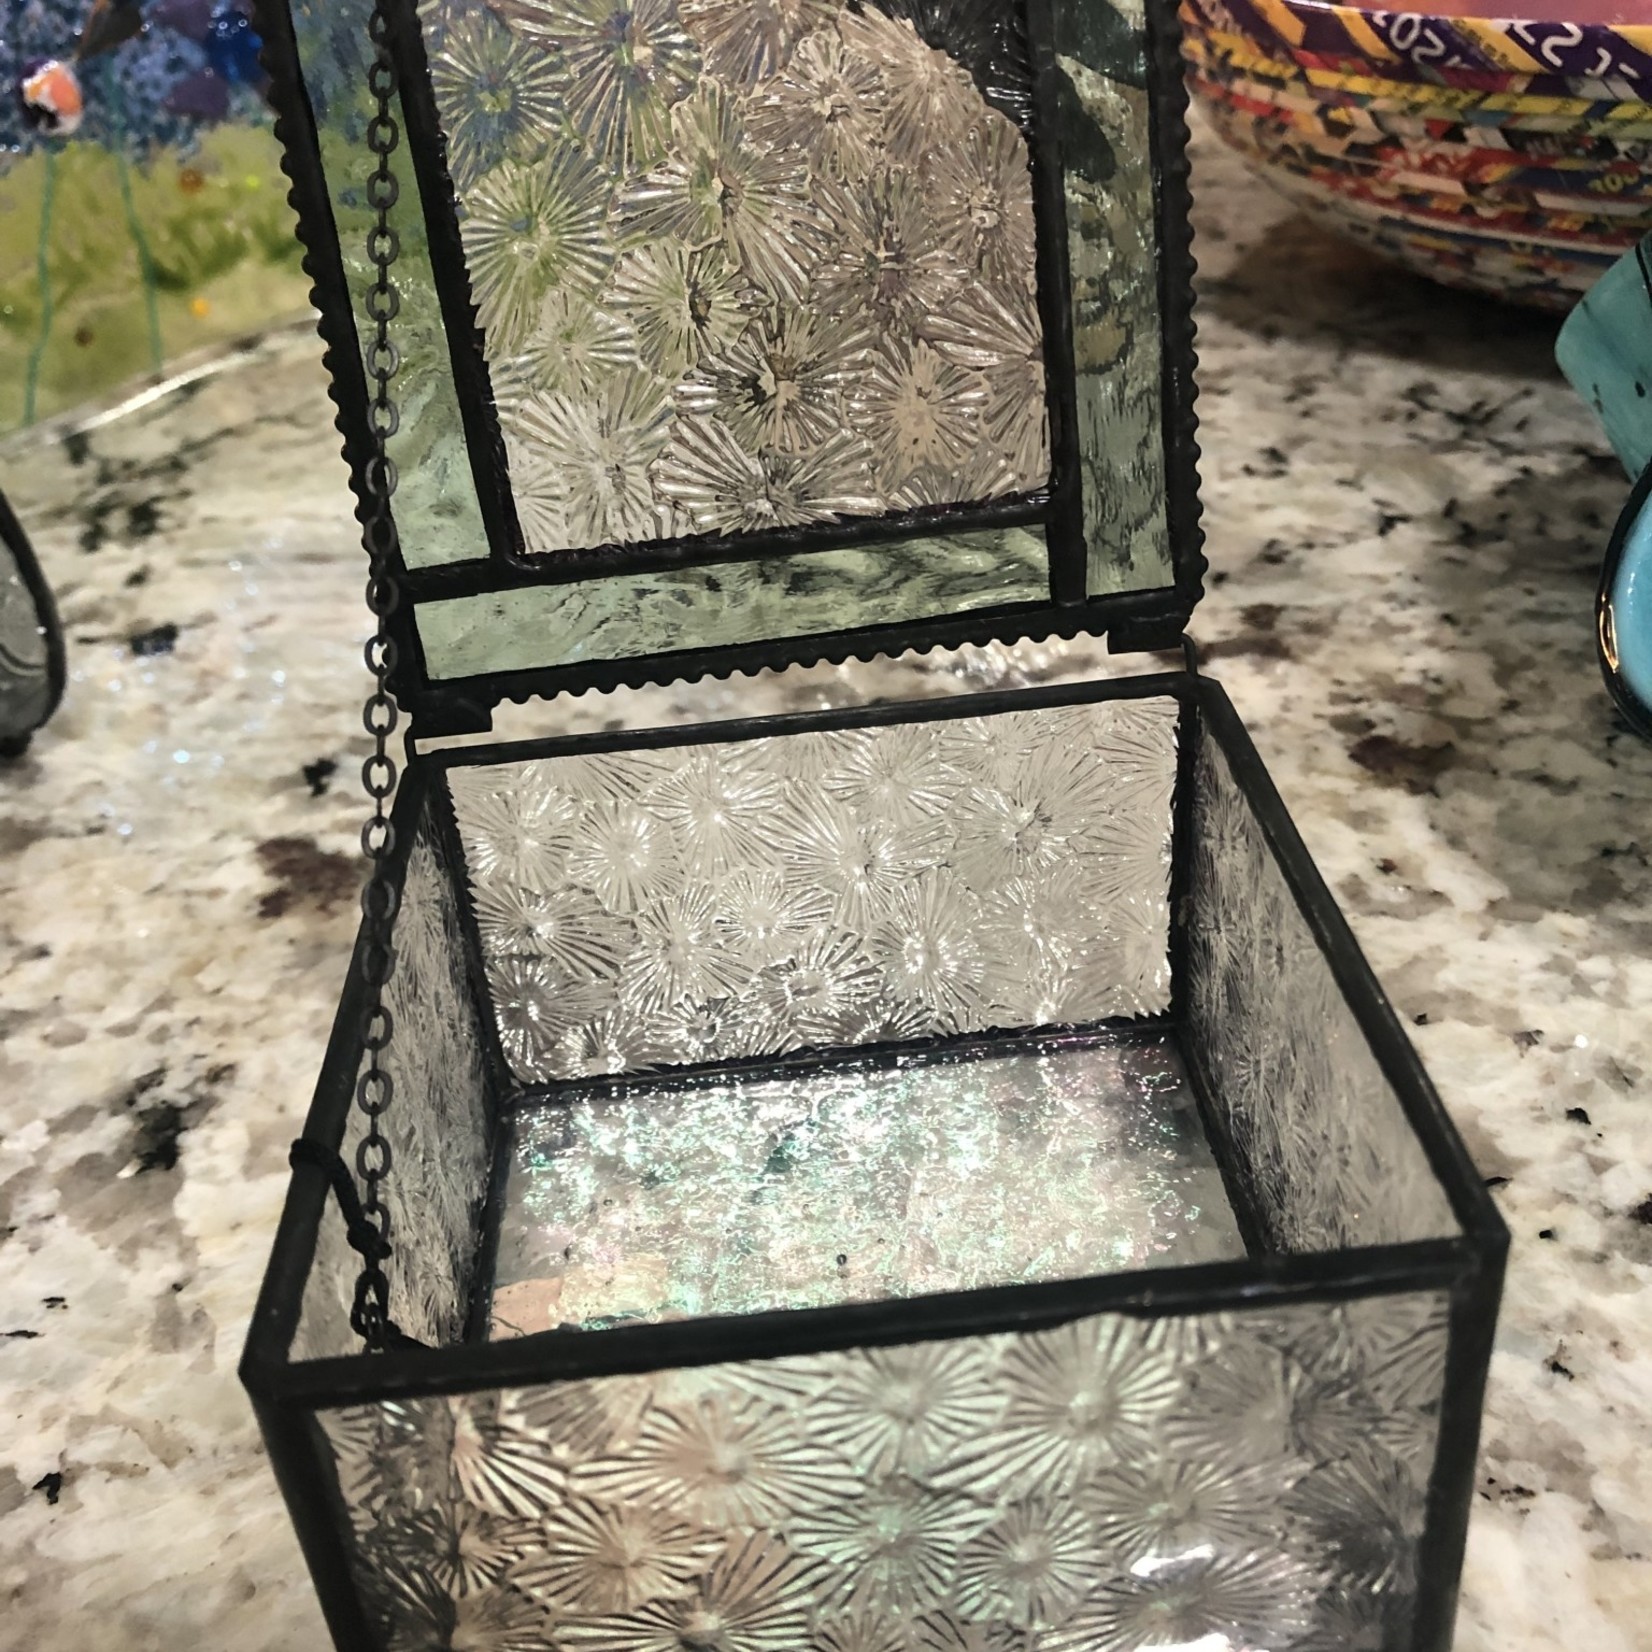 Lima Bean Glass Box - Sage Accents with Dragonfly